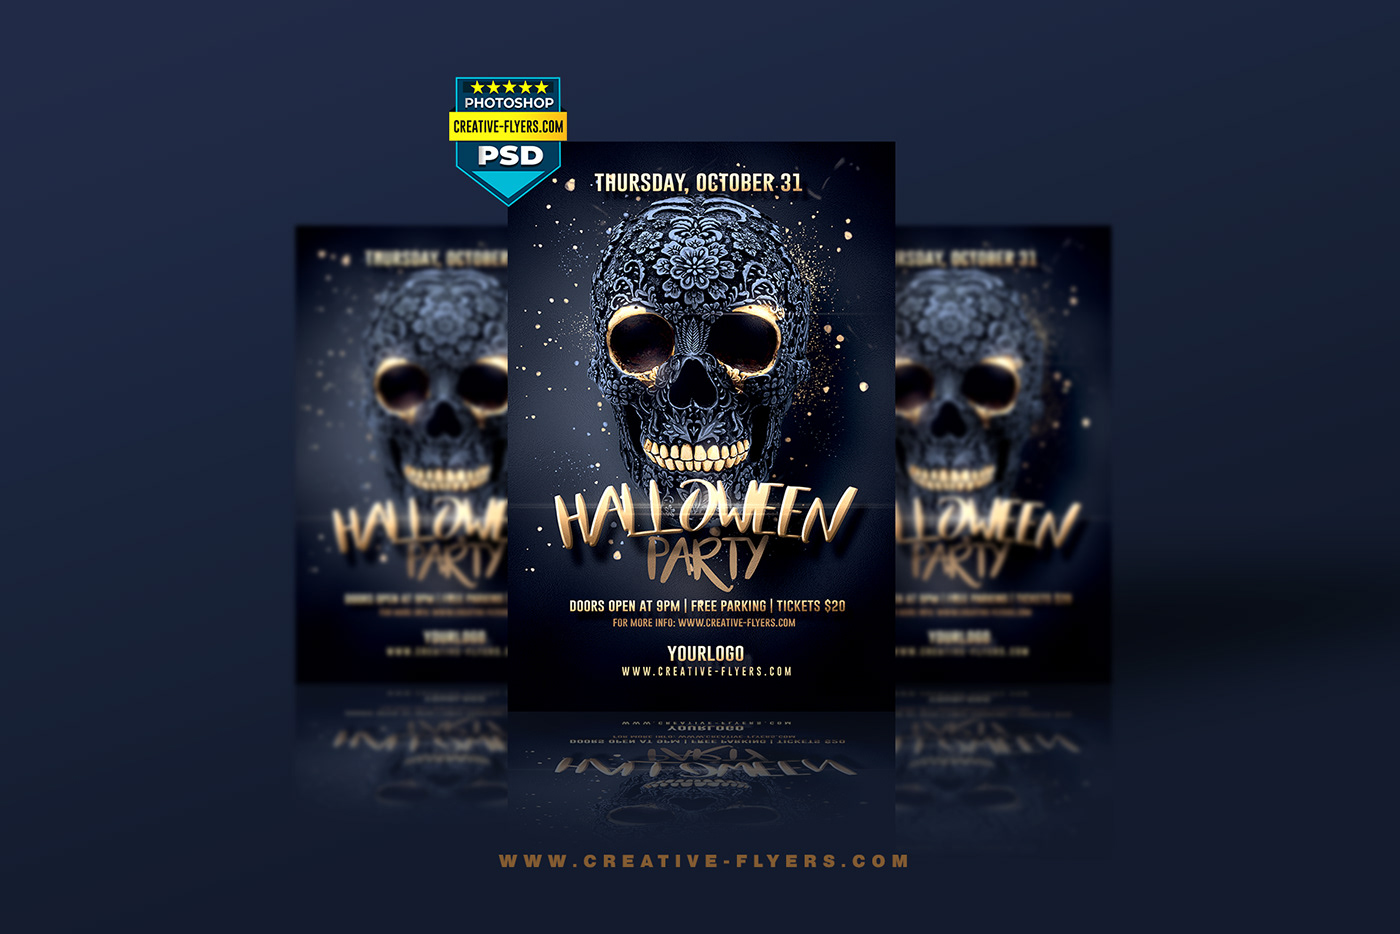 Halloween flyer templates graphics design invitations Adobe Photoshop psd files Halloween party posters black and gold skulls